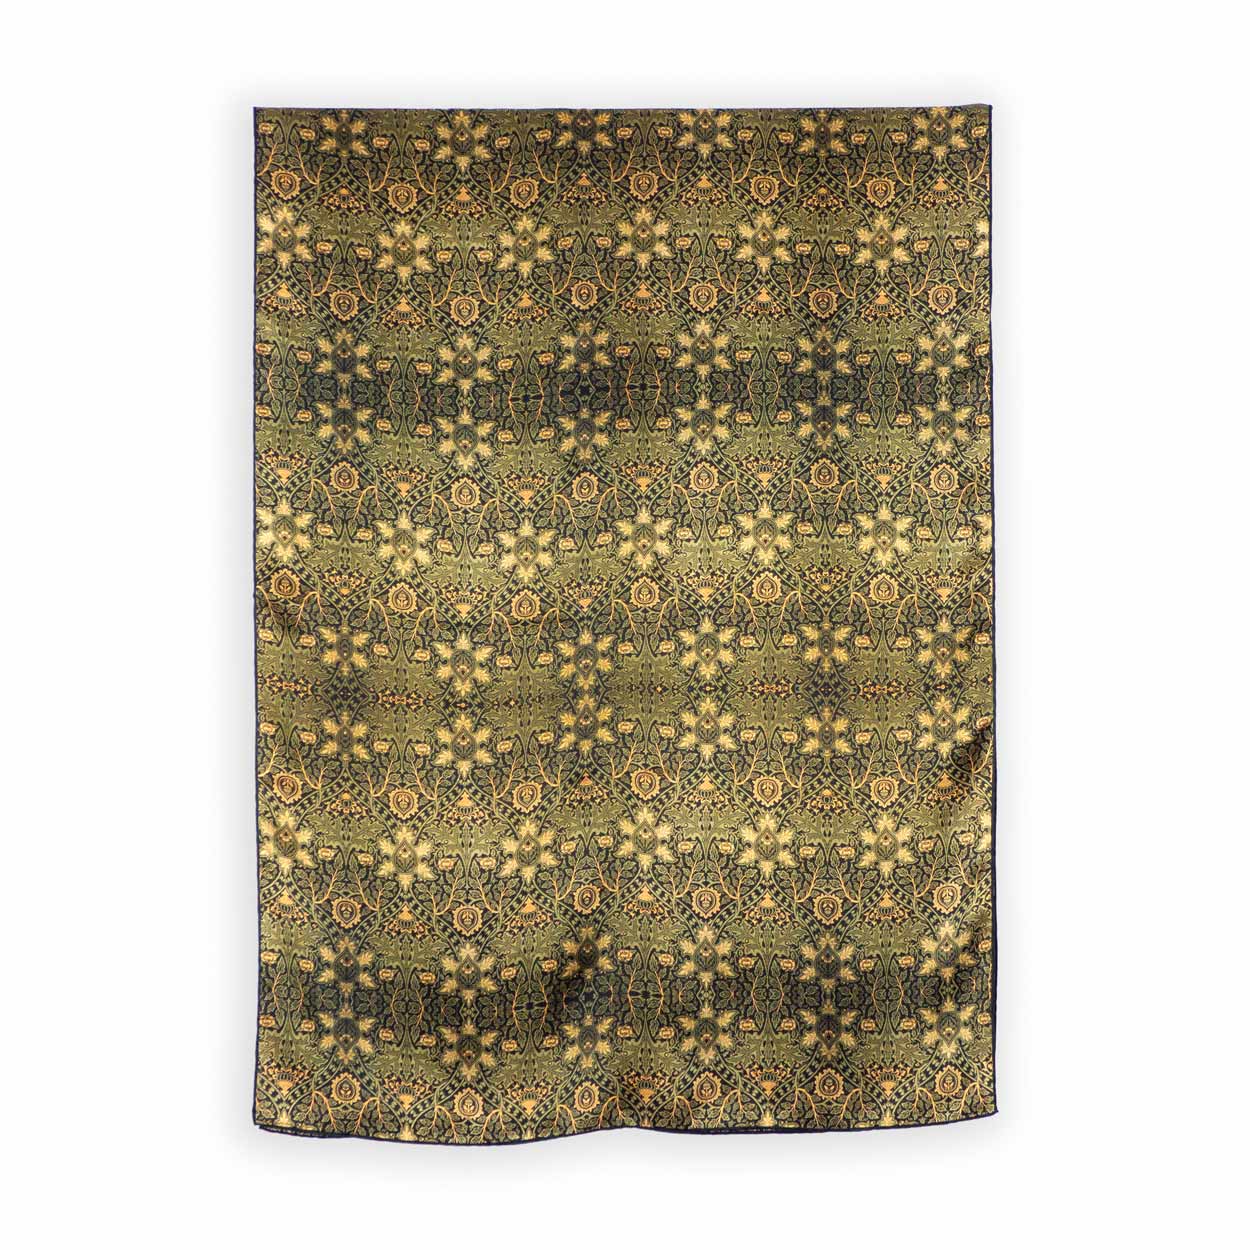 Large green scarf with Art Nouveau inspired floral print